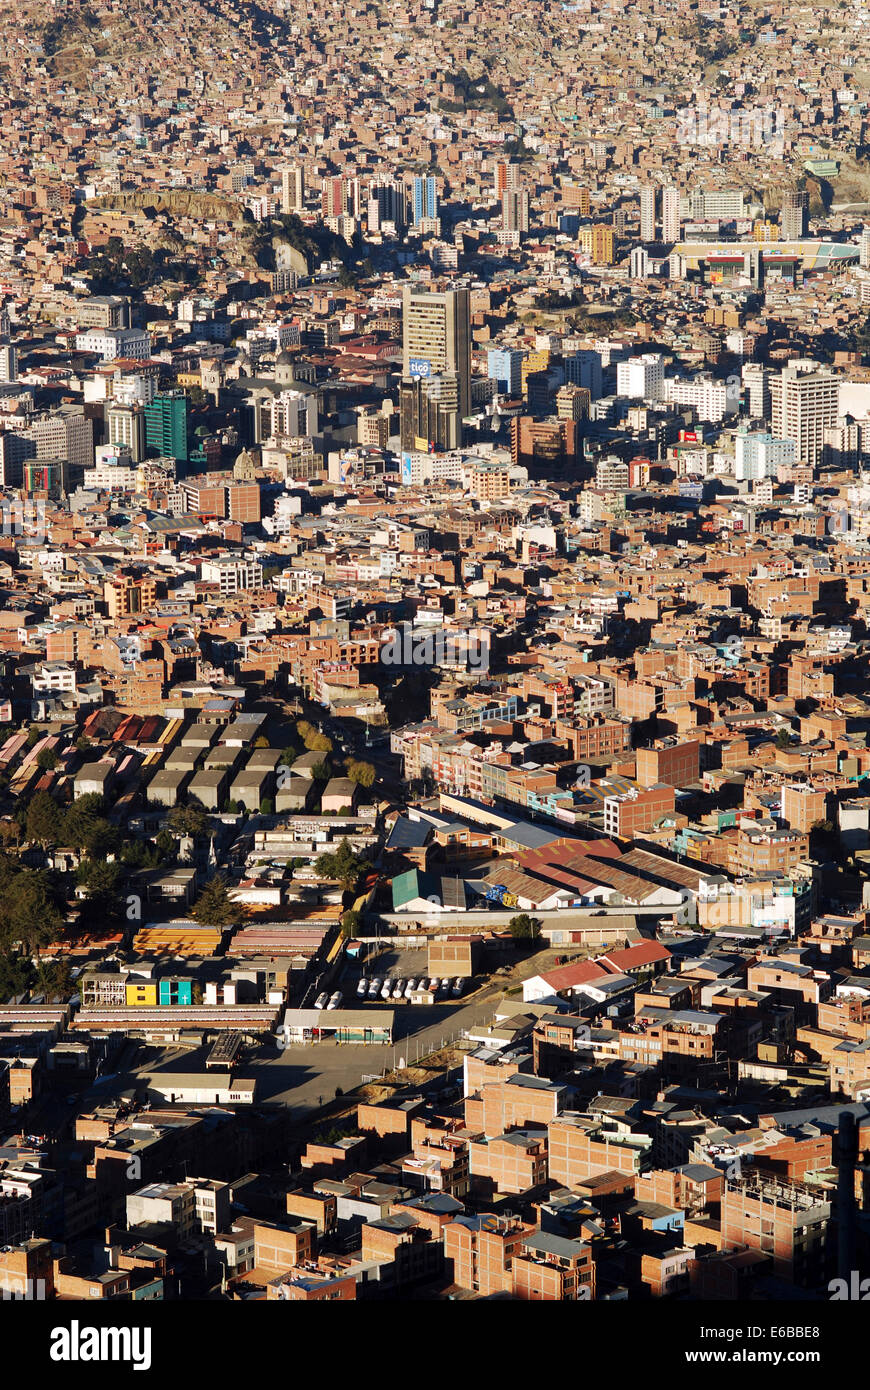 Bolivia, La Paz, overview of the capital city of Bolivia, seen from the cliffs of neighboring El Alto Stock Photo